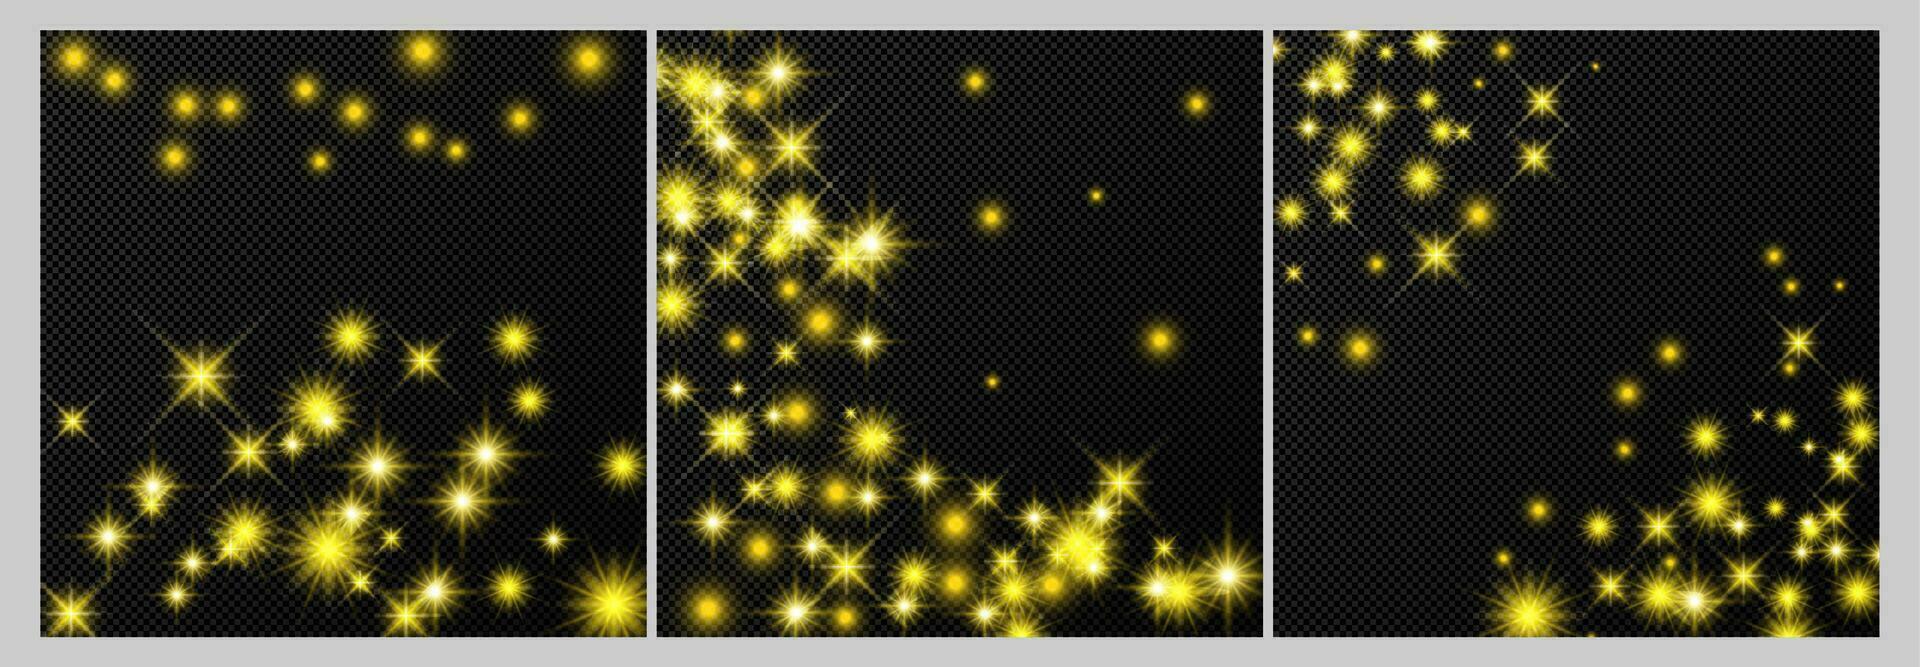 Set of three gold backdrops with stars and dust sparkles isolated on dark background. Celebratory magical Christmas shining light effect. Vector illustration.